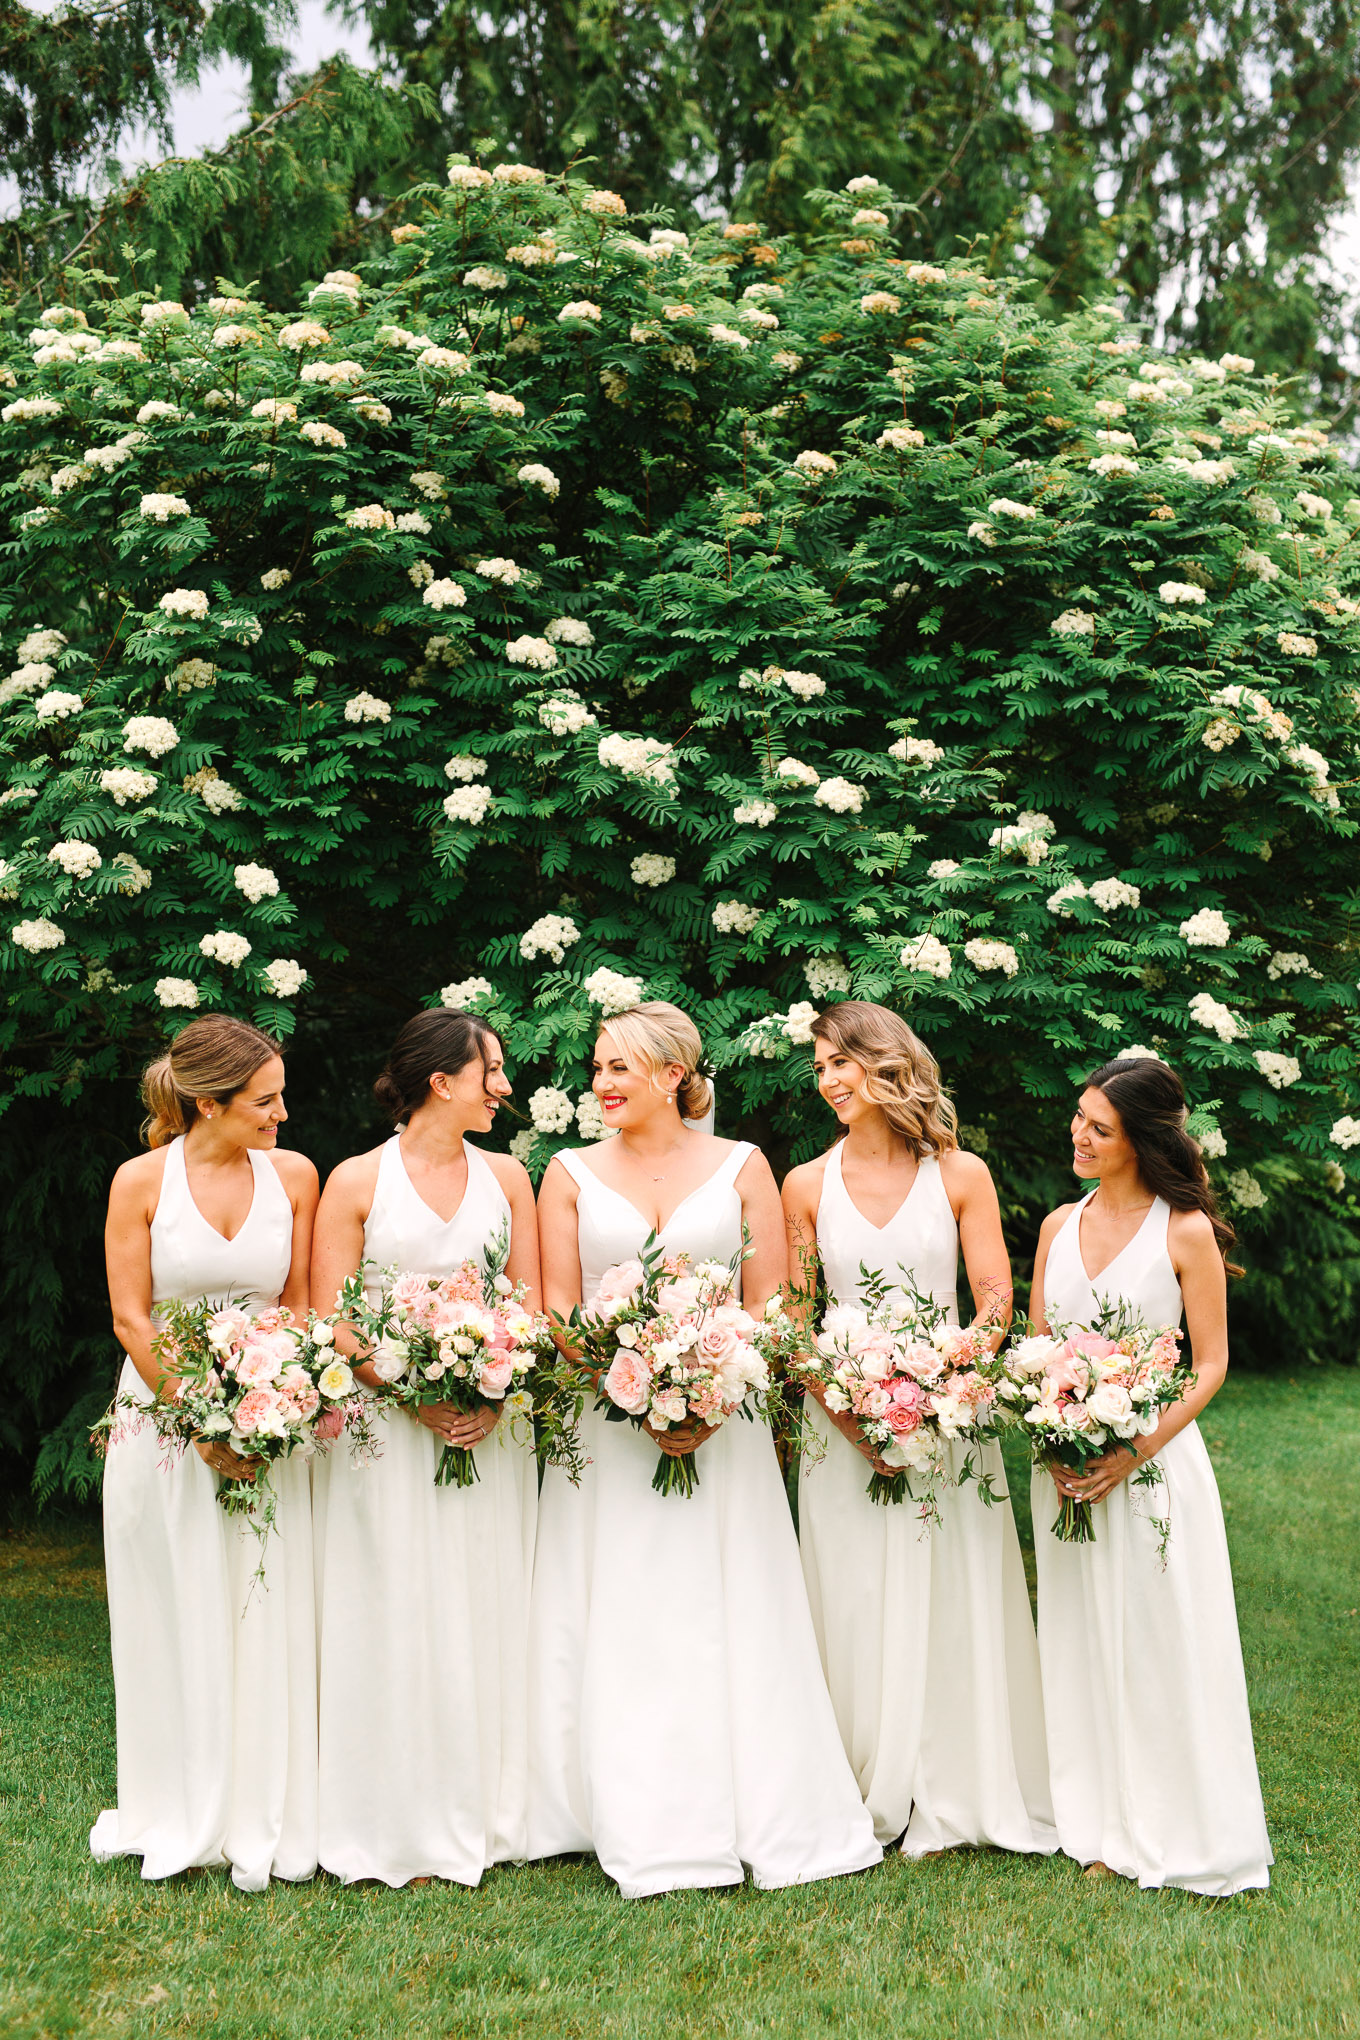 Bridesmaids in all white. Millbrook Resort Queenstown New Zealand wedding by Mary Costa Photography | www.marycostaweddings.com